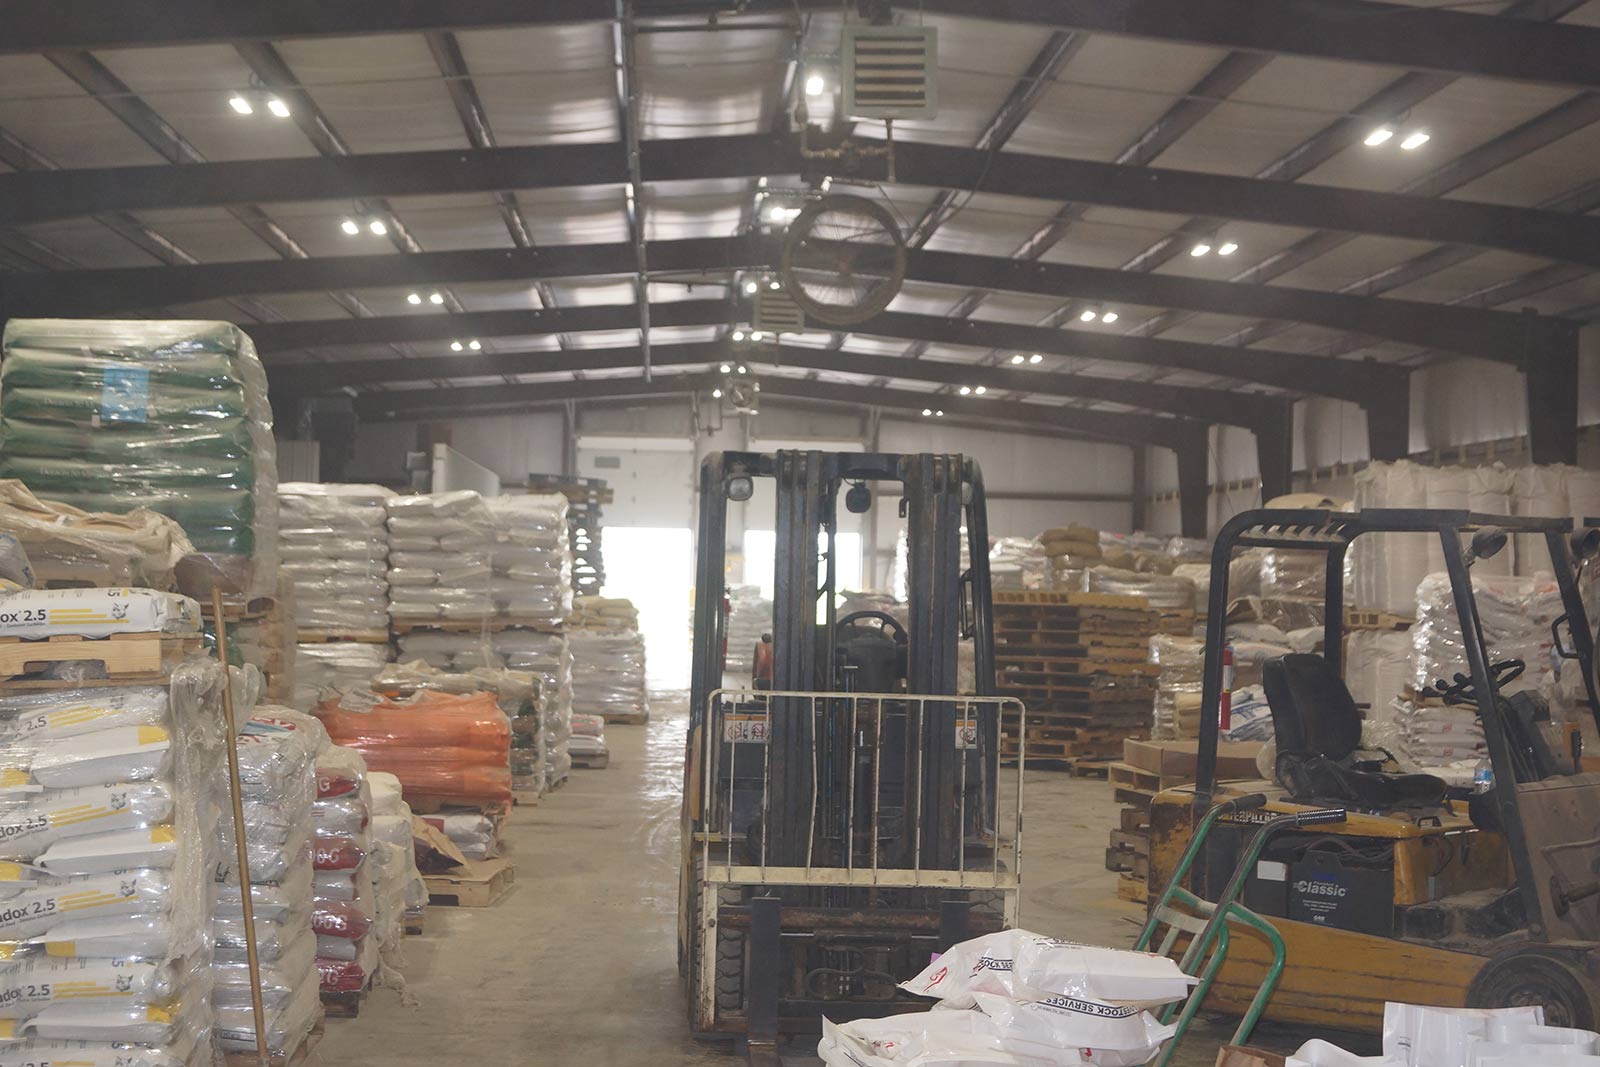 interior view of an Effingham feed mill showing lighting fixtures, forklifts, and pallets of bags